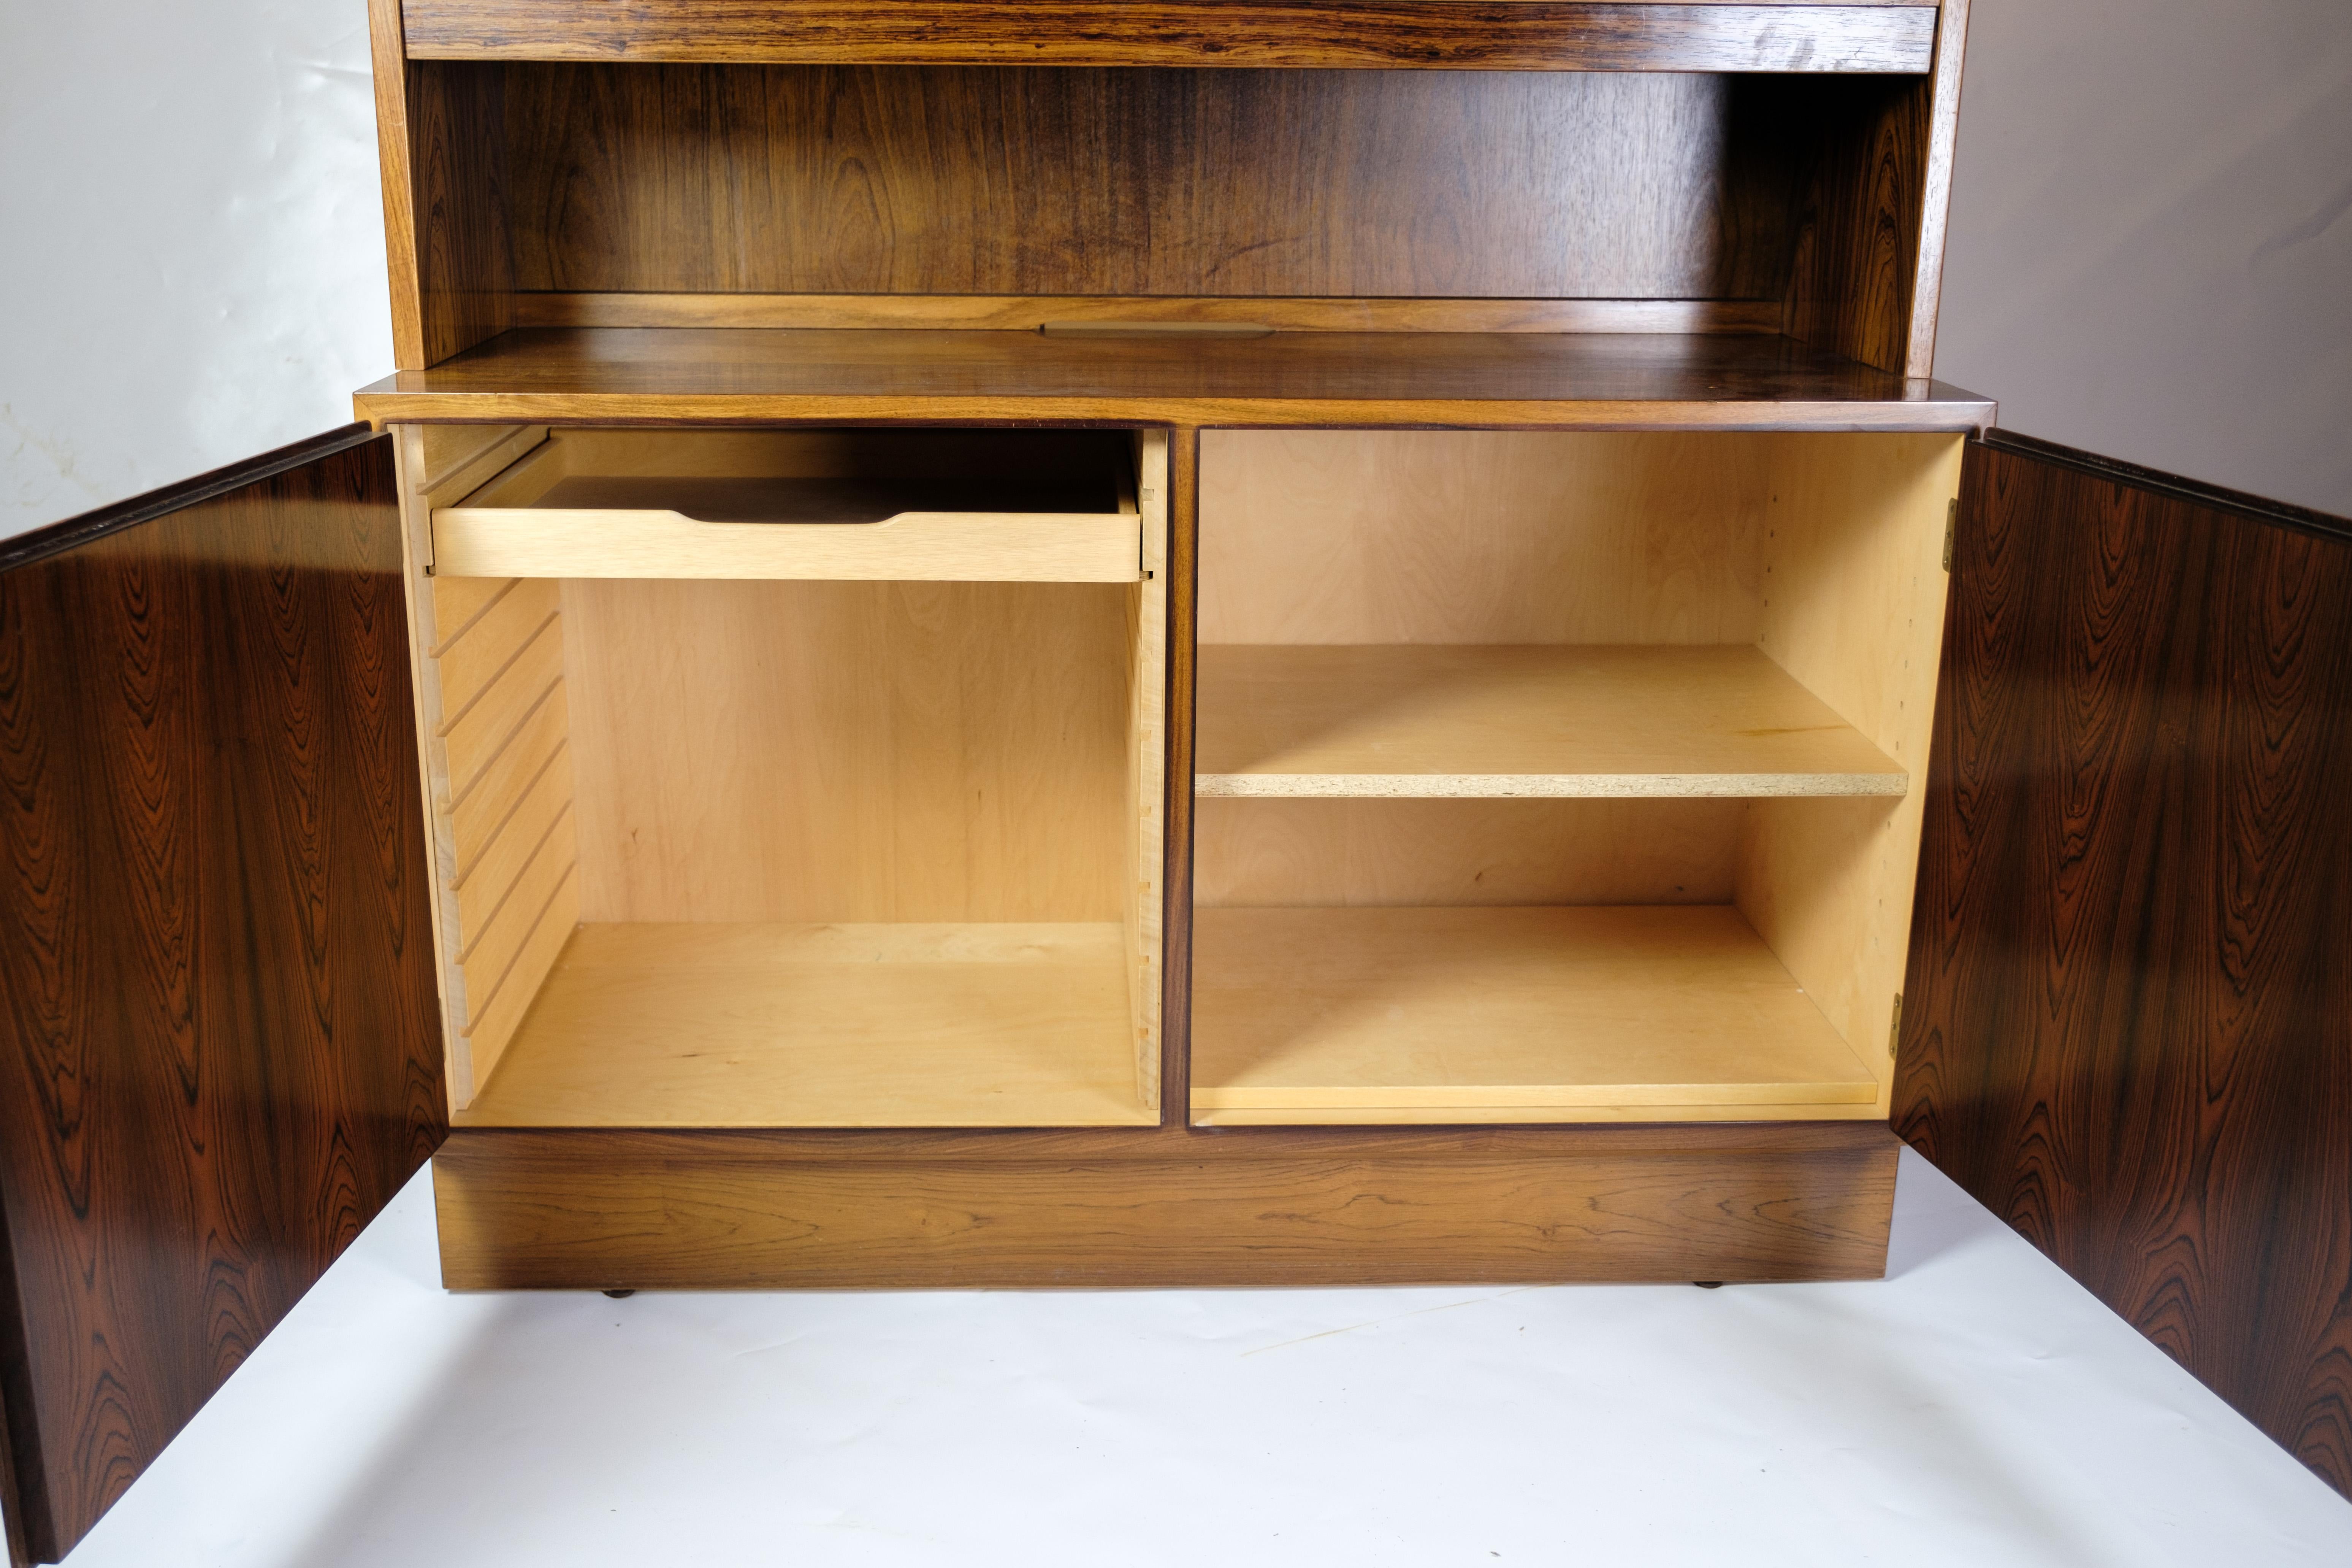 Mid-20th Century Bookcase Made In Rosewood Made By Hundevad Furniture From 1960s For Sale